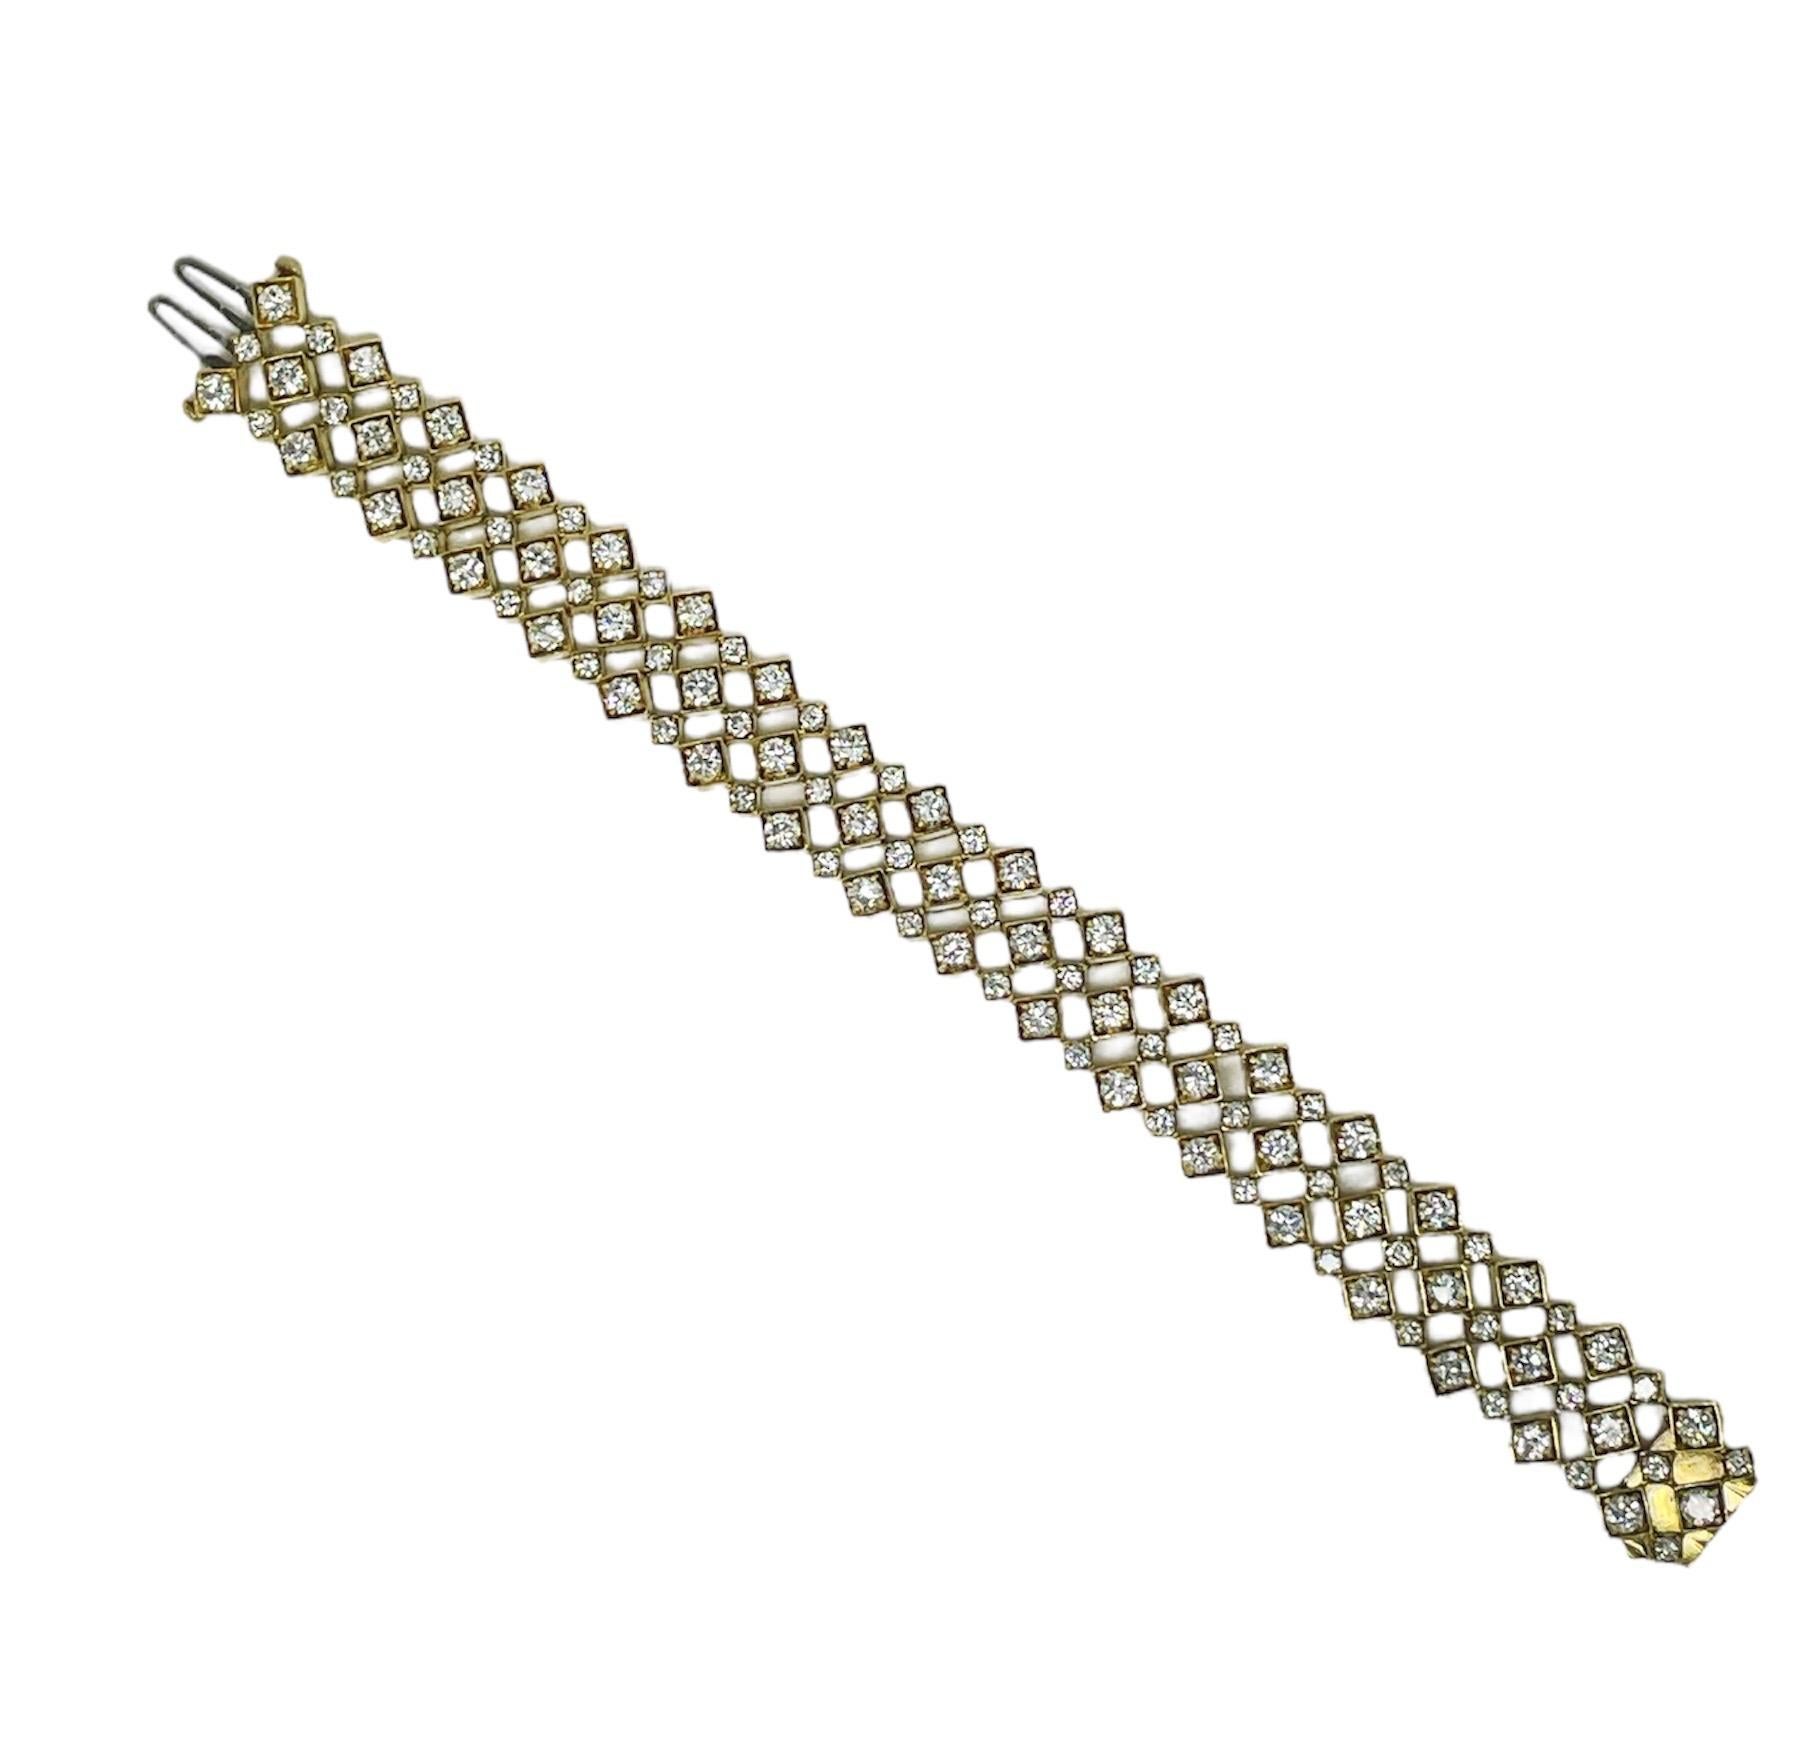 This fun geometric designed bracelet contains 108 top quality round brilliant cut diamonds weighing approximately 11.86 carats total. In an open work design and beautifully crafted in 18 karat yellow gold, this bracelet is extremely comfortable and